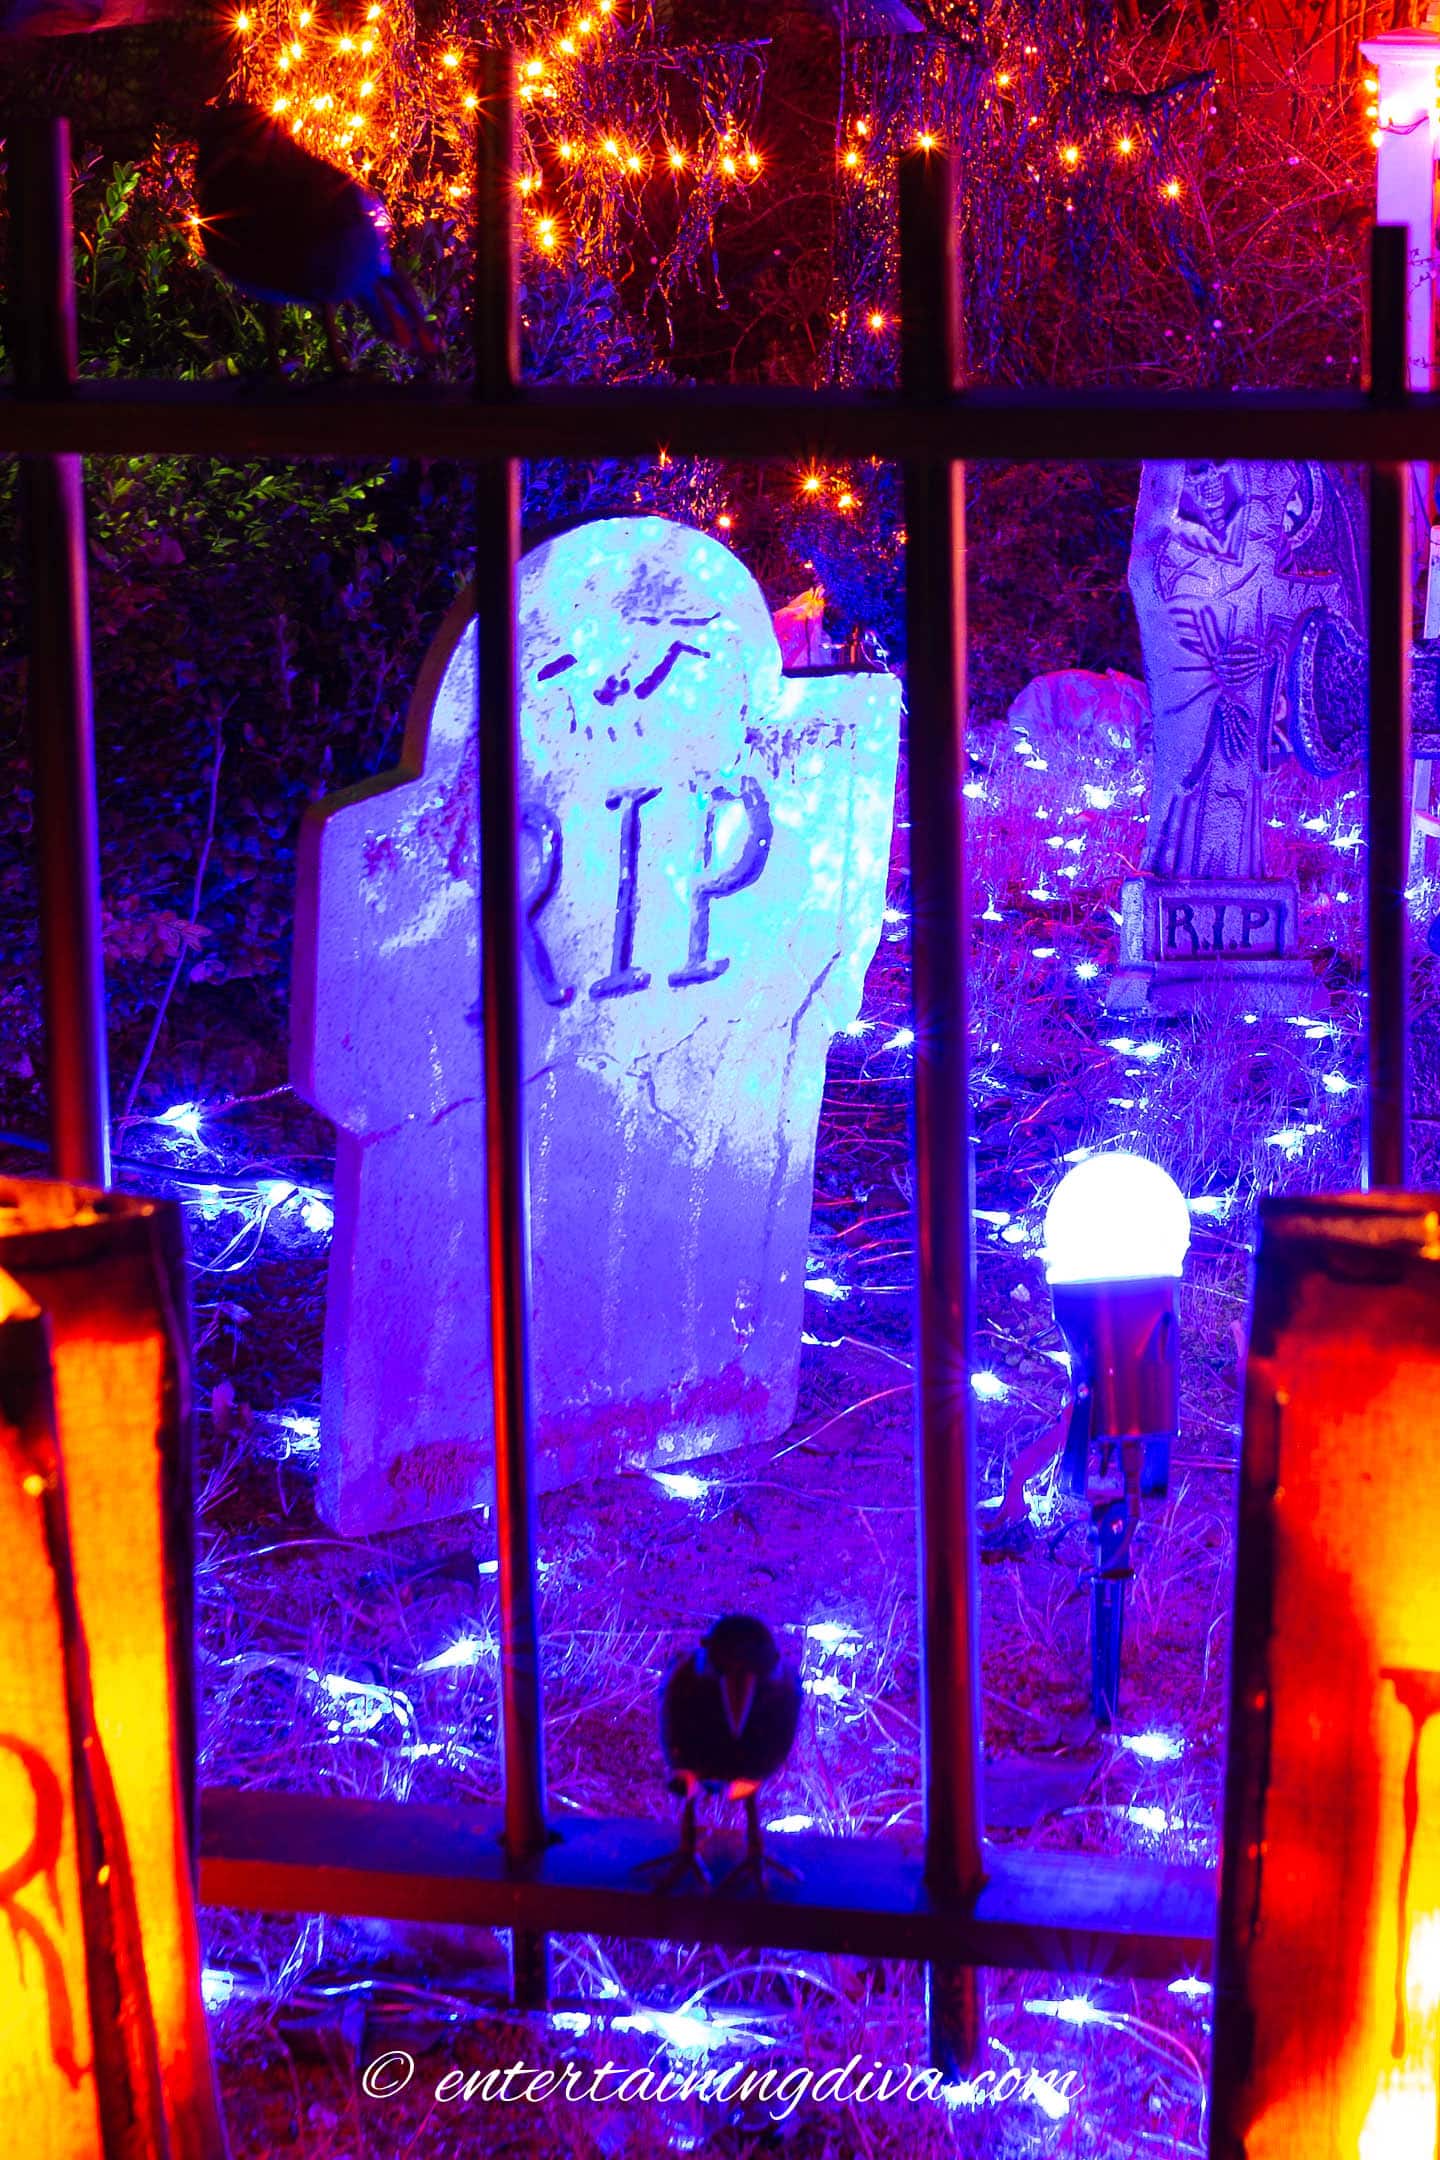 A spooky metal fence with a view of a graveyard, illuminated by Halloween outdoor lighting.